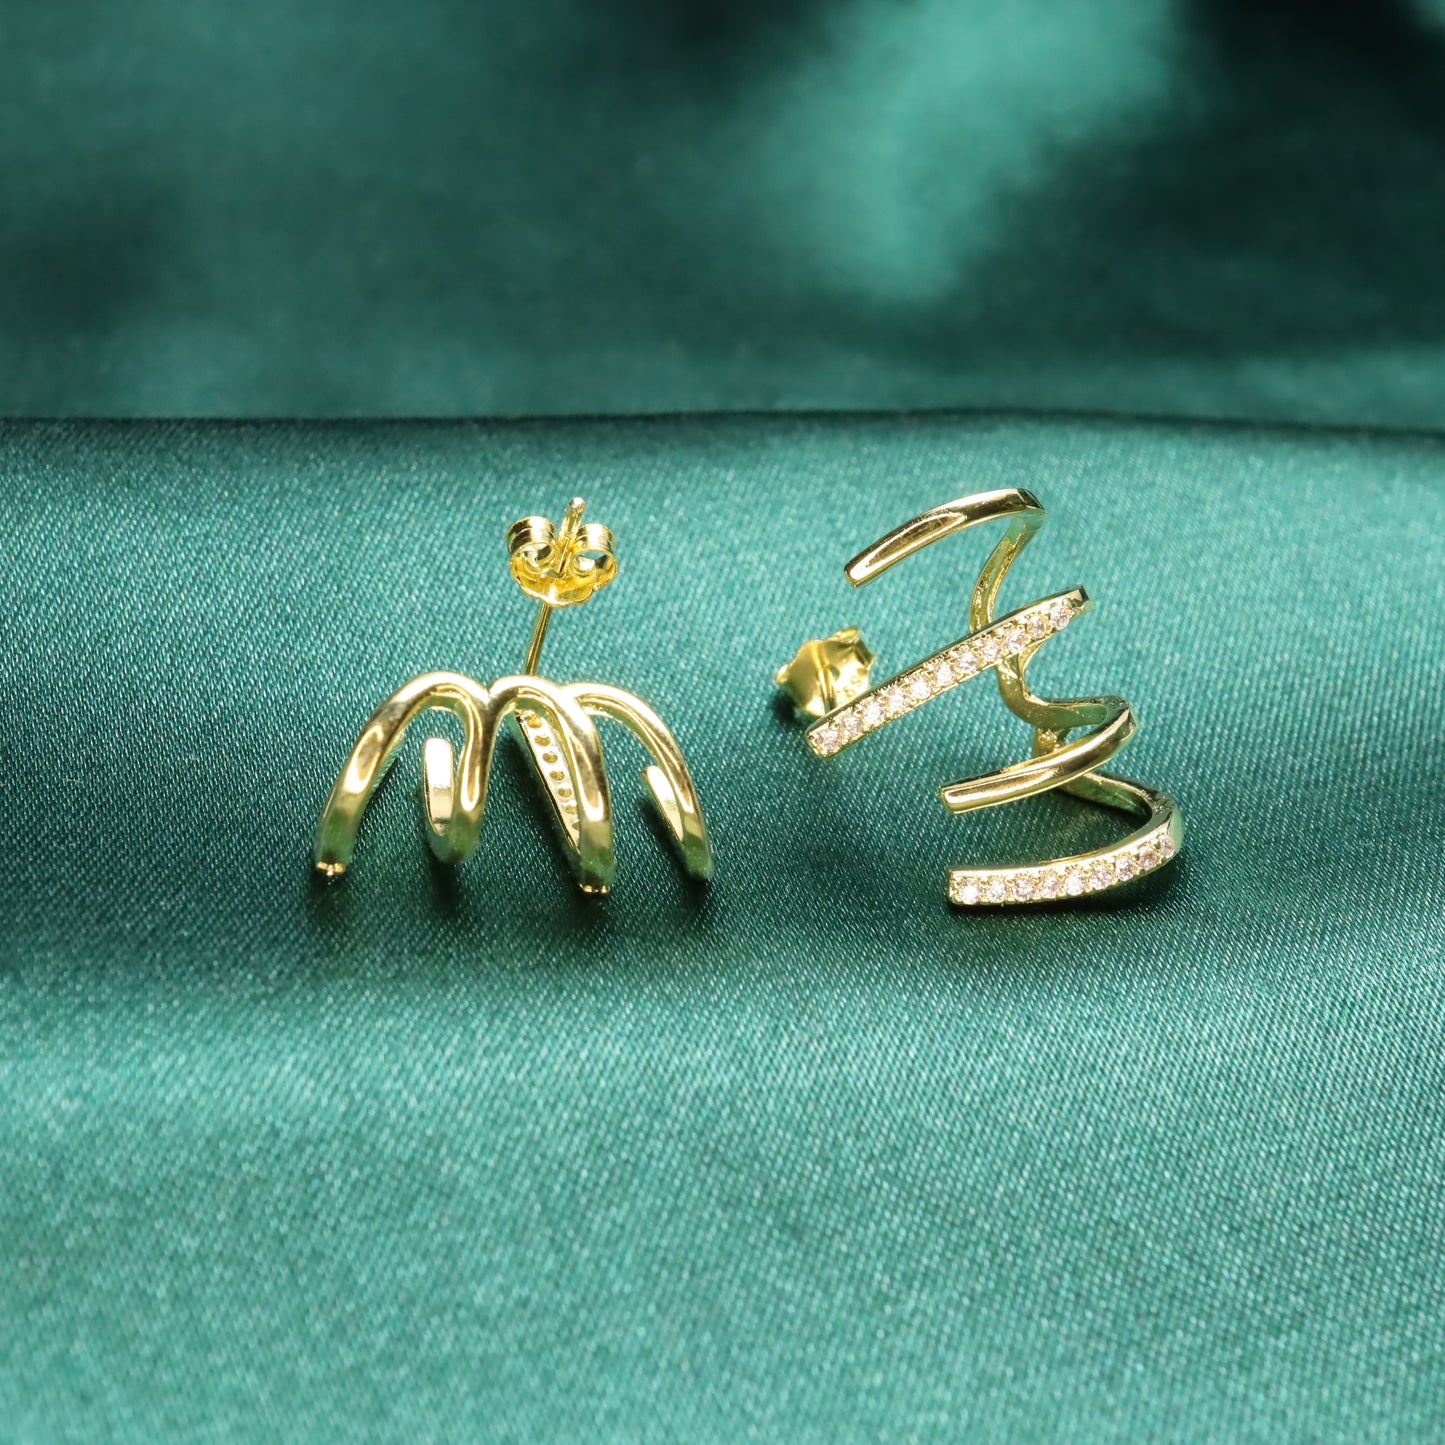 Fortune Dragon Claws - Gold Plated Zircon S925 Silver Stud Earrings (Color: Gold)